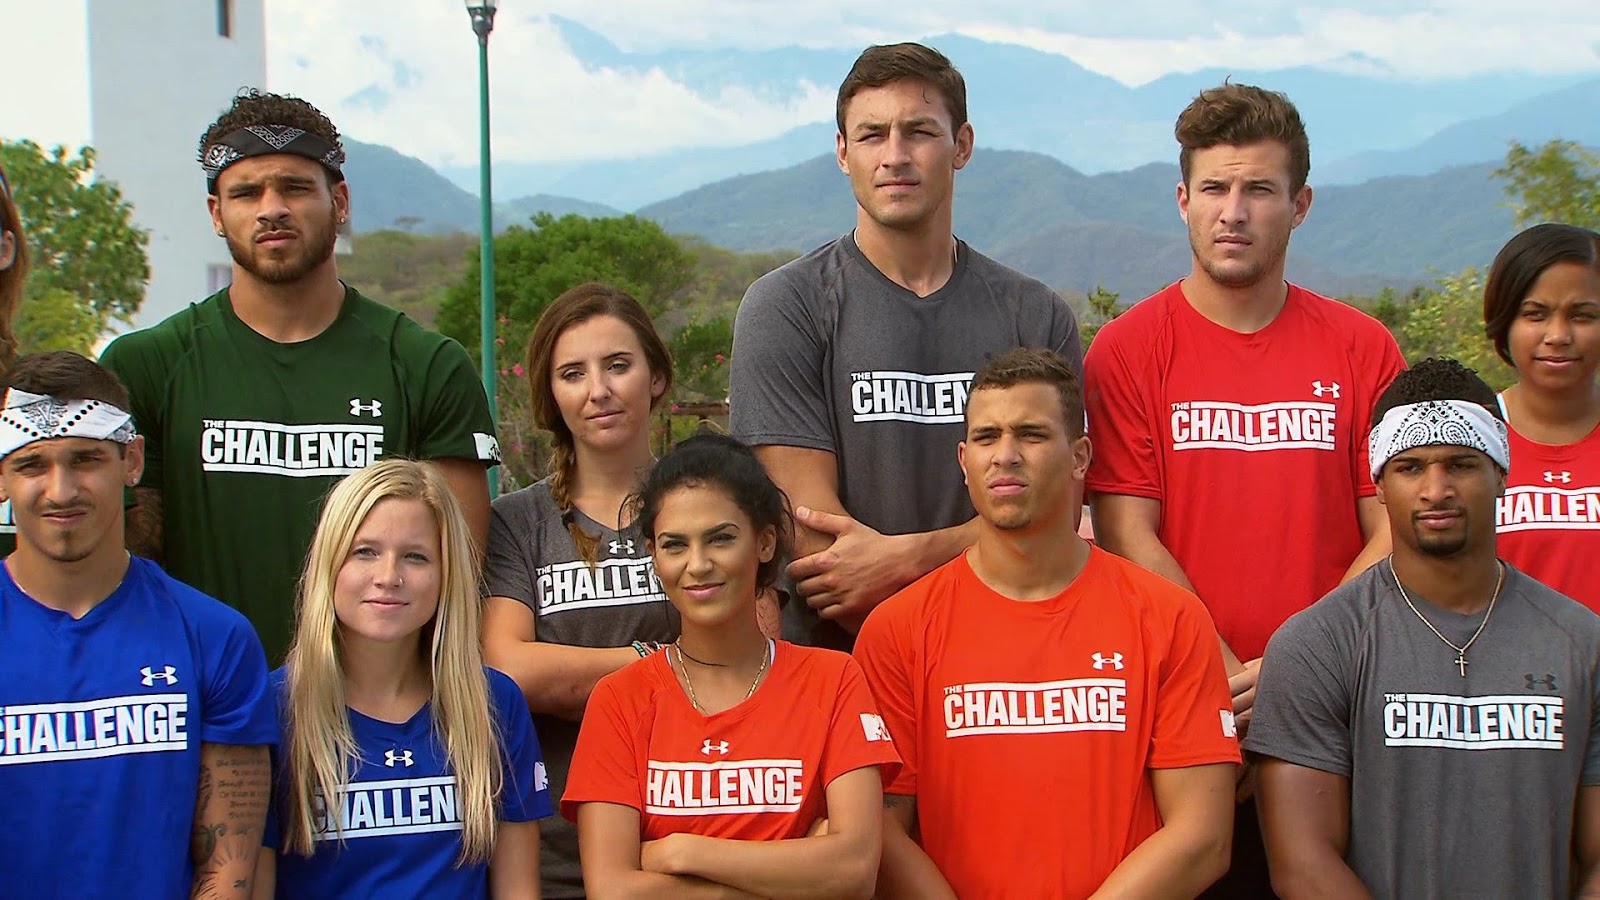 The Challenge: Rivals 3.